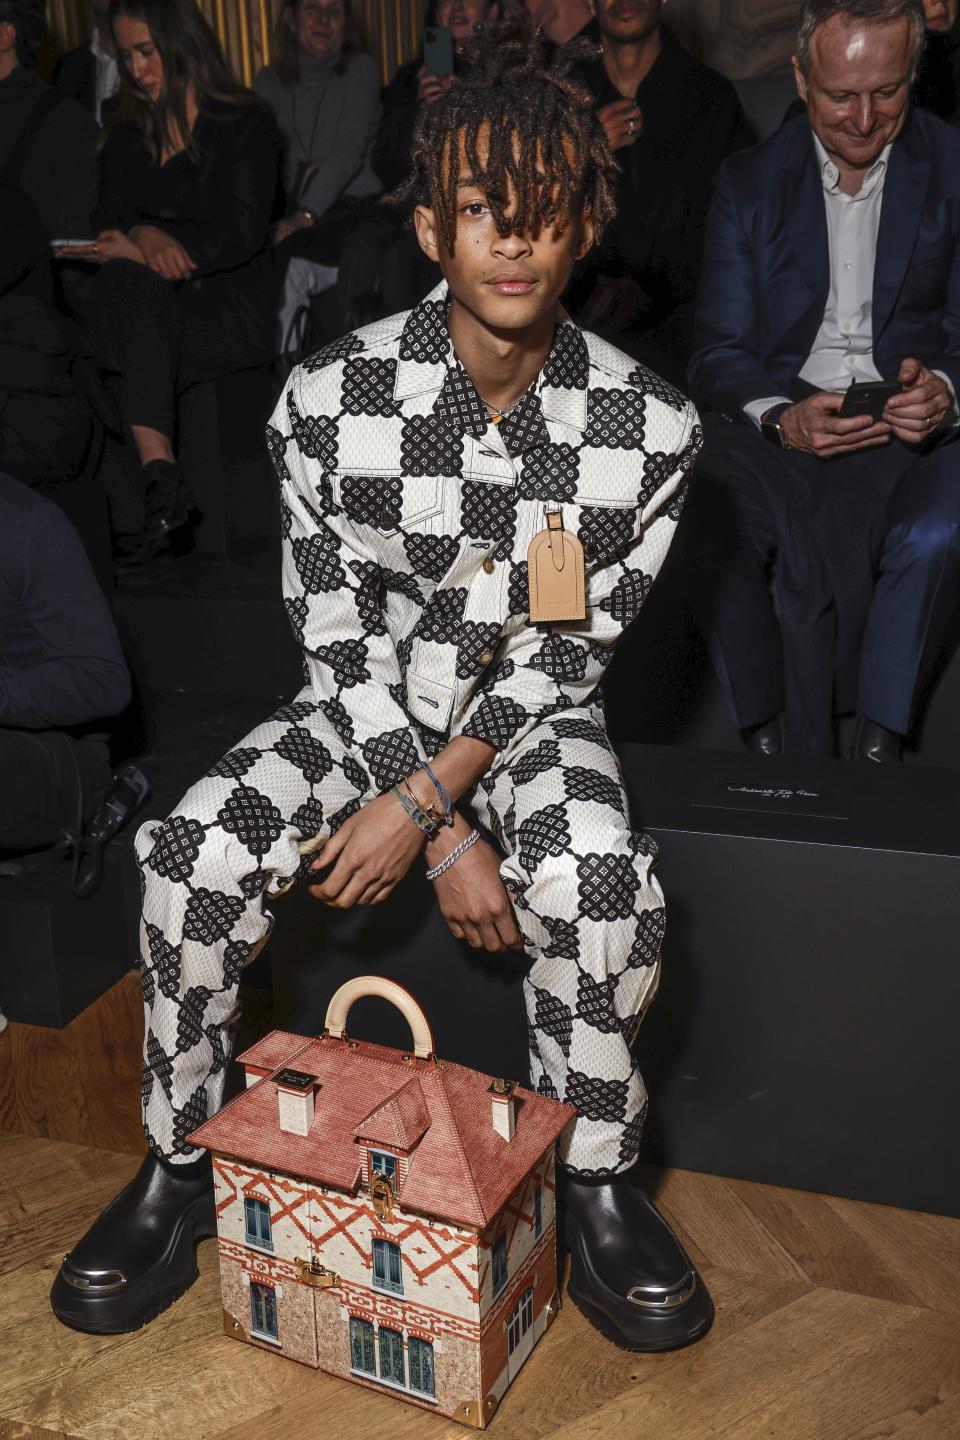 Jaden Smith attends the Louis Vuitton Fall/Winter 2023-2024 ready-to-wear collection presented Monday, March 6, 2023 in Paris. (Vianney Le Caer/Invision/AP)